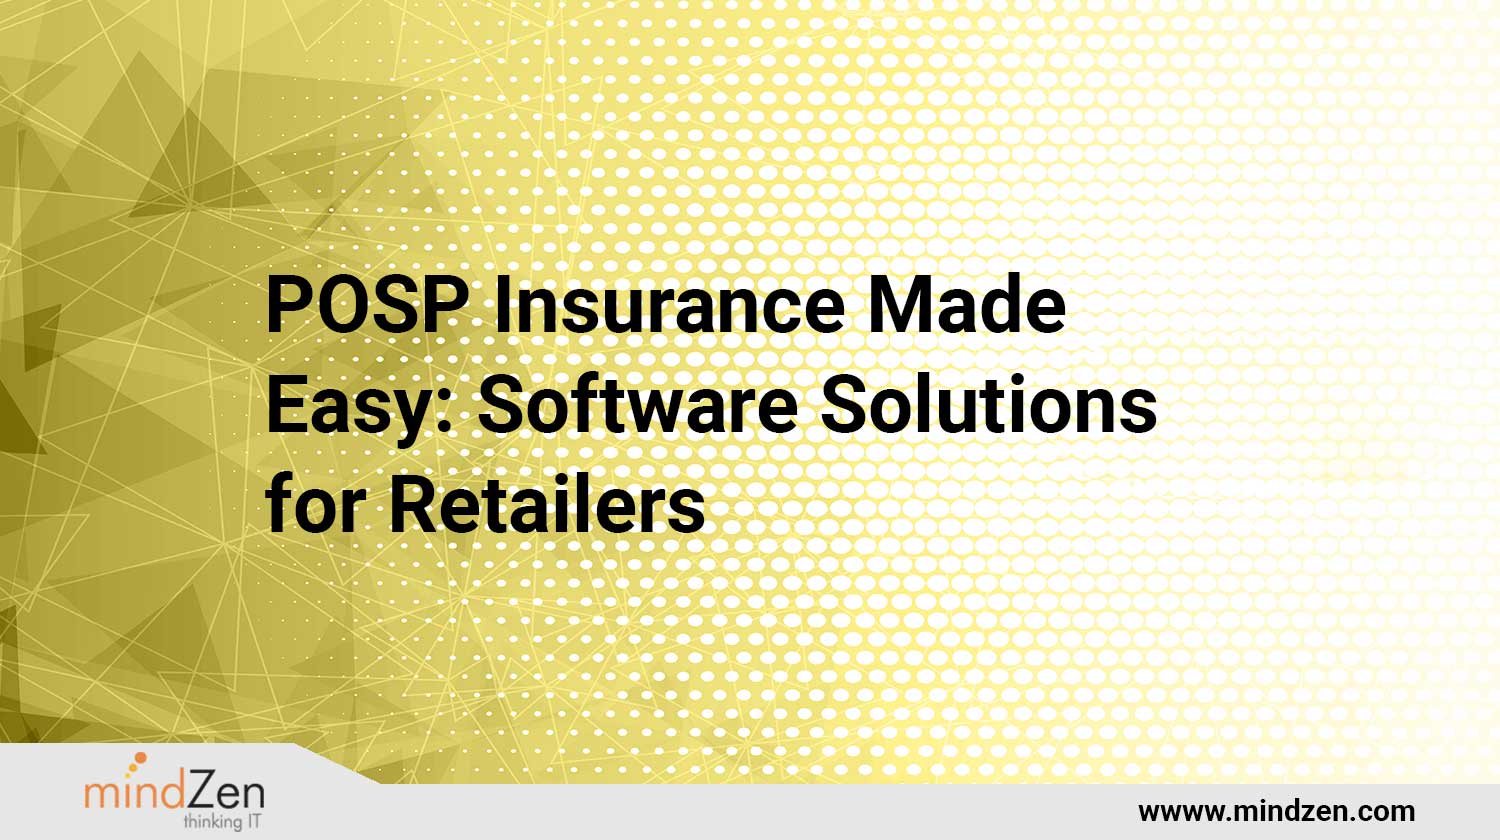 POSP Insurance Made Easy: Software Solutions for Retailers
